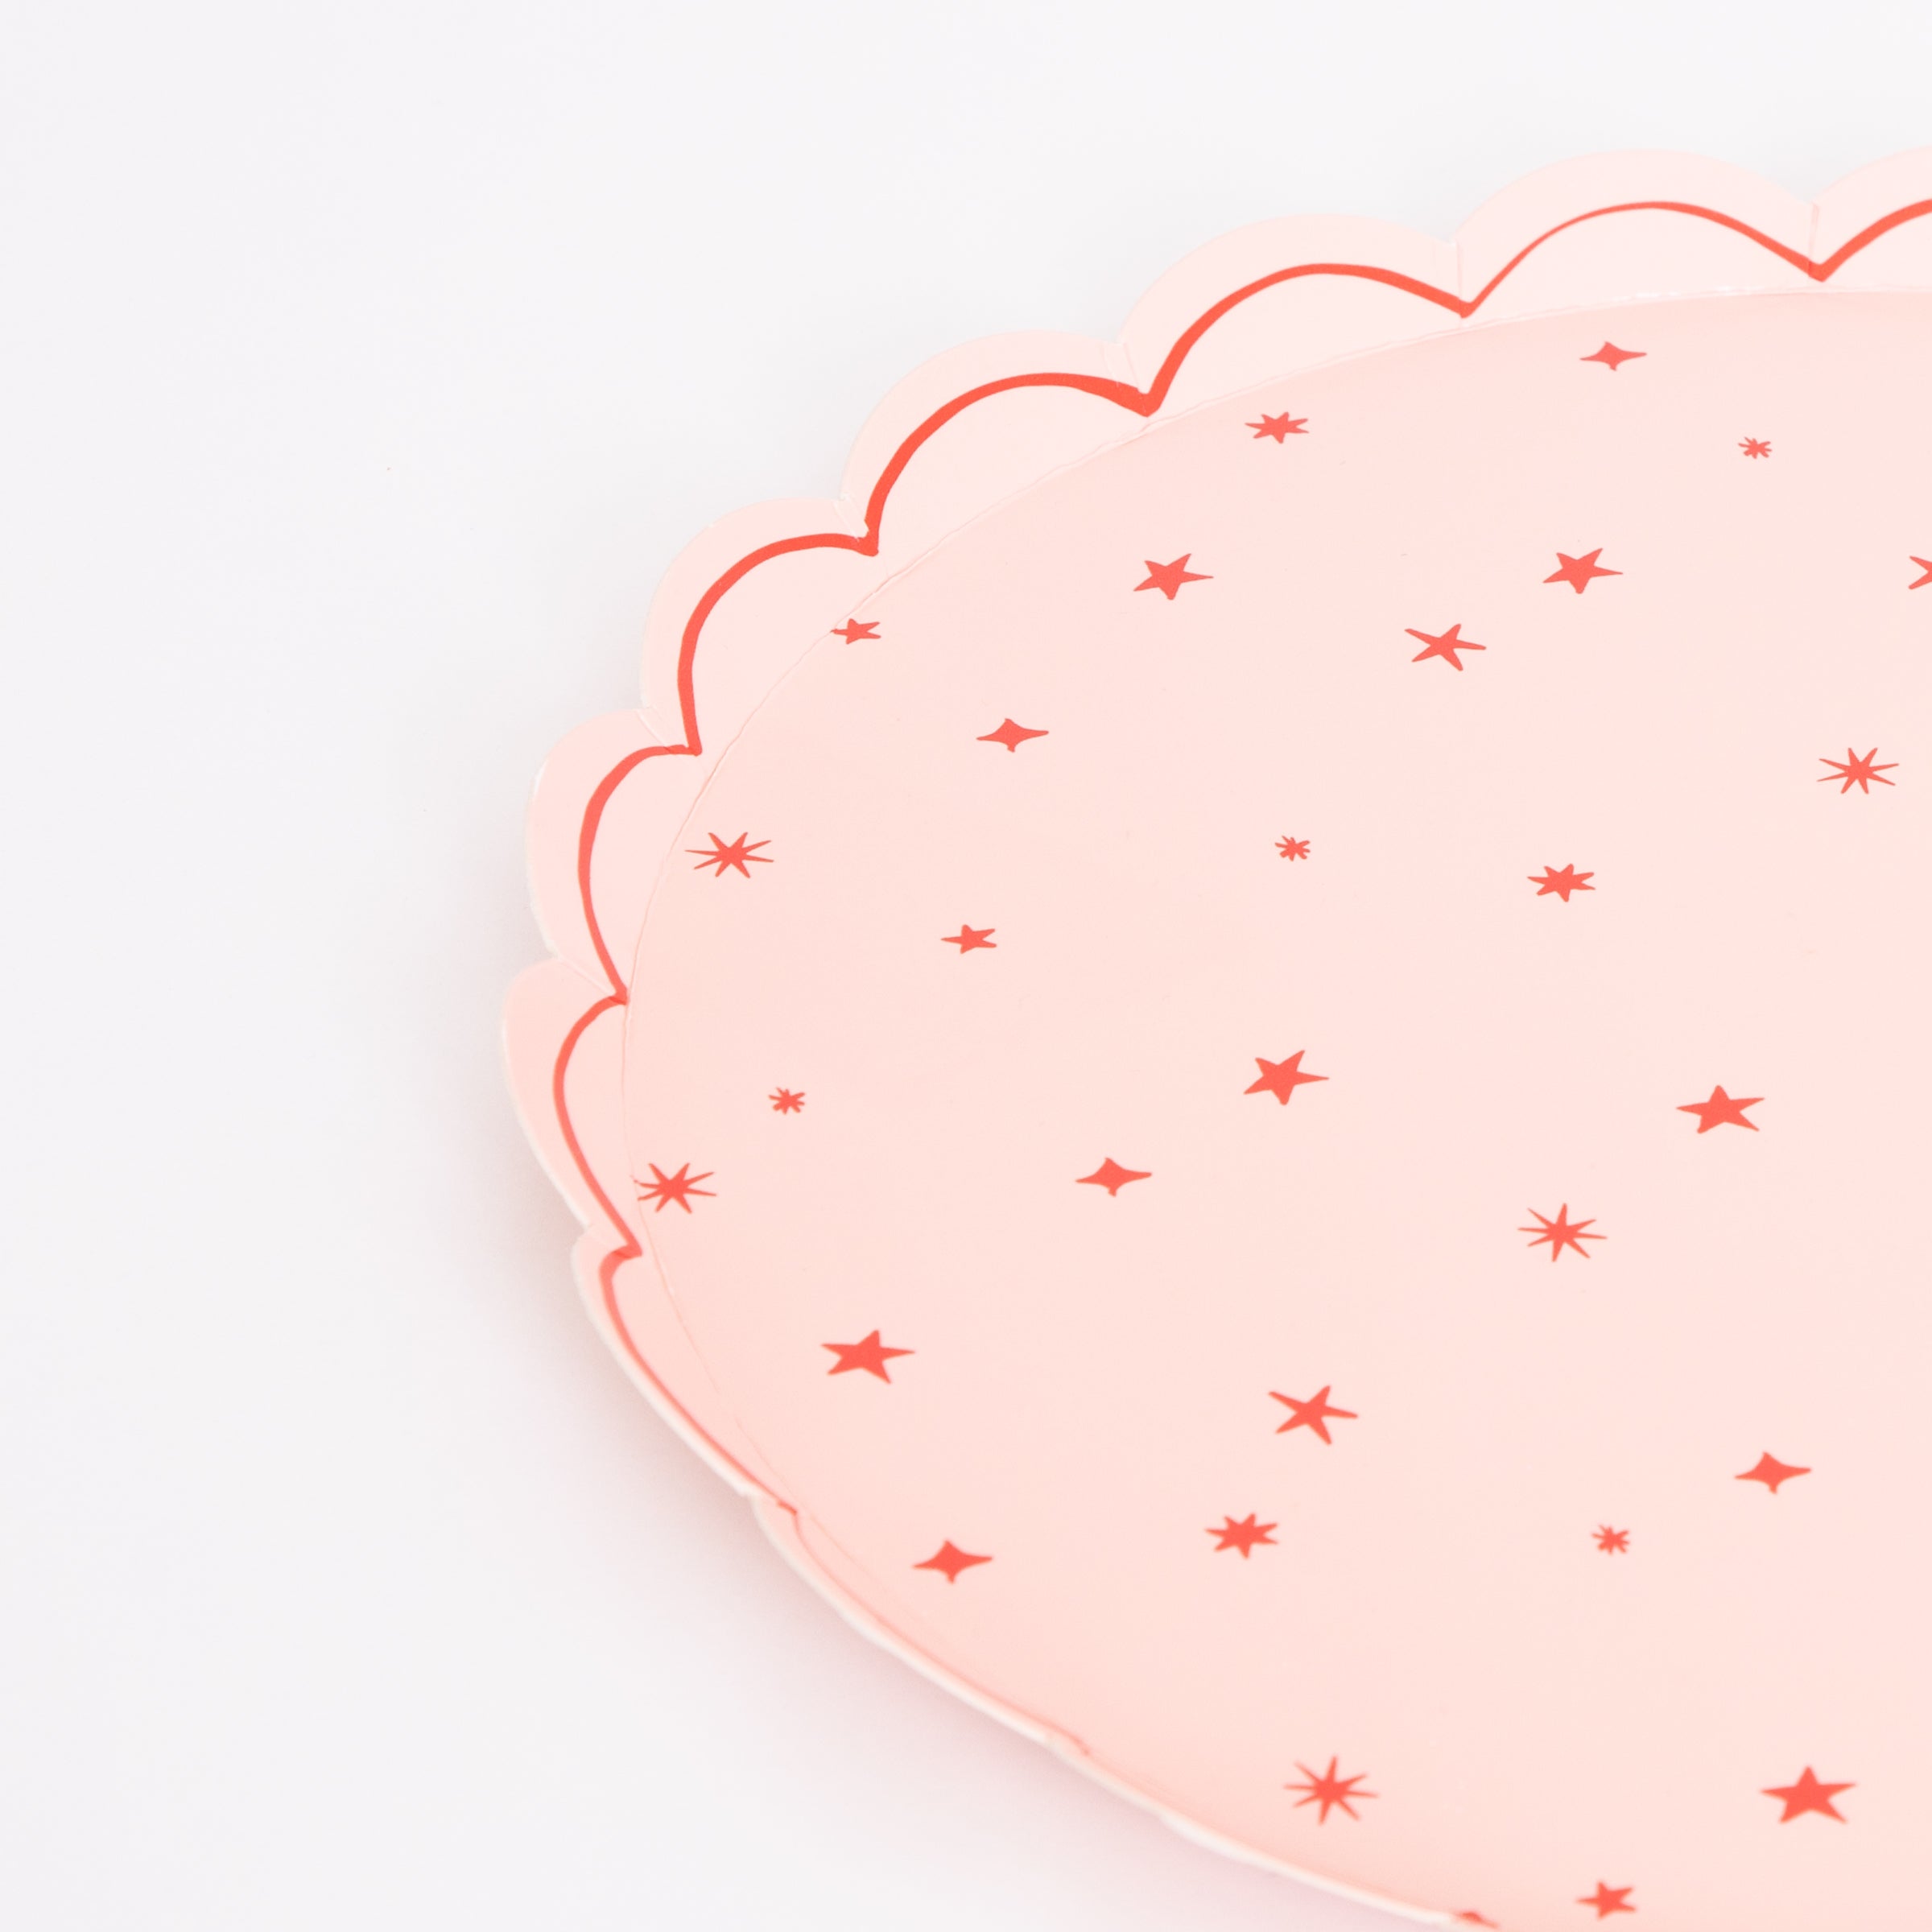 Our star plates, in a set with pink plates, blue plates and mint plates, are the perfect party plates for a kids birthday party.